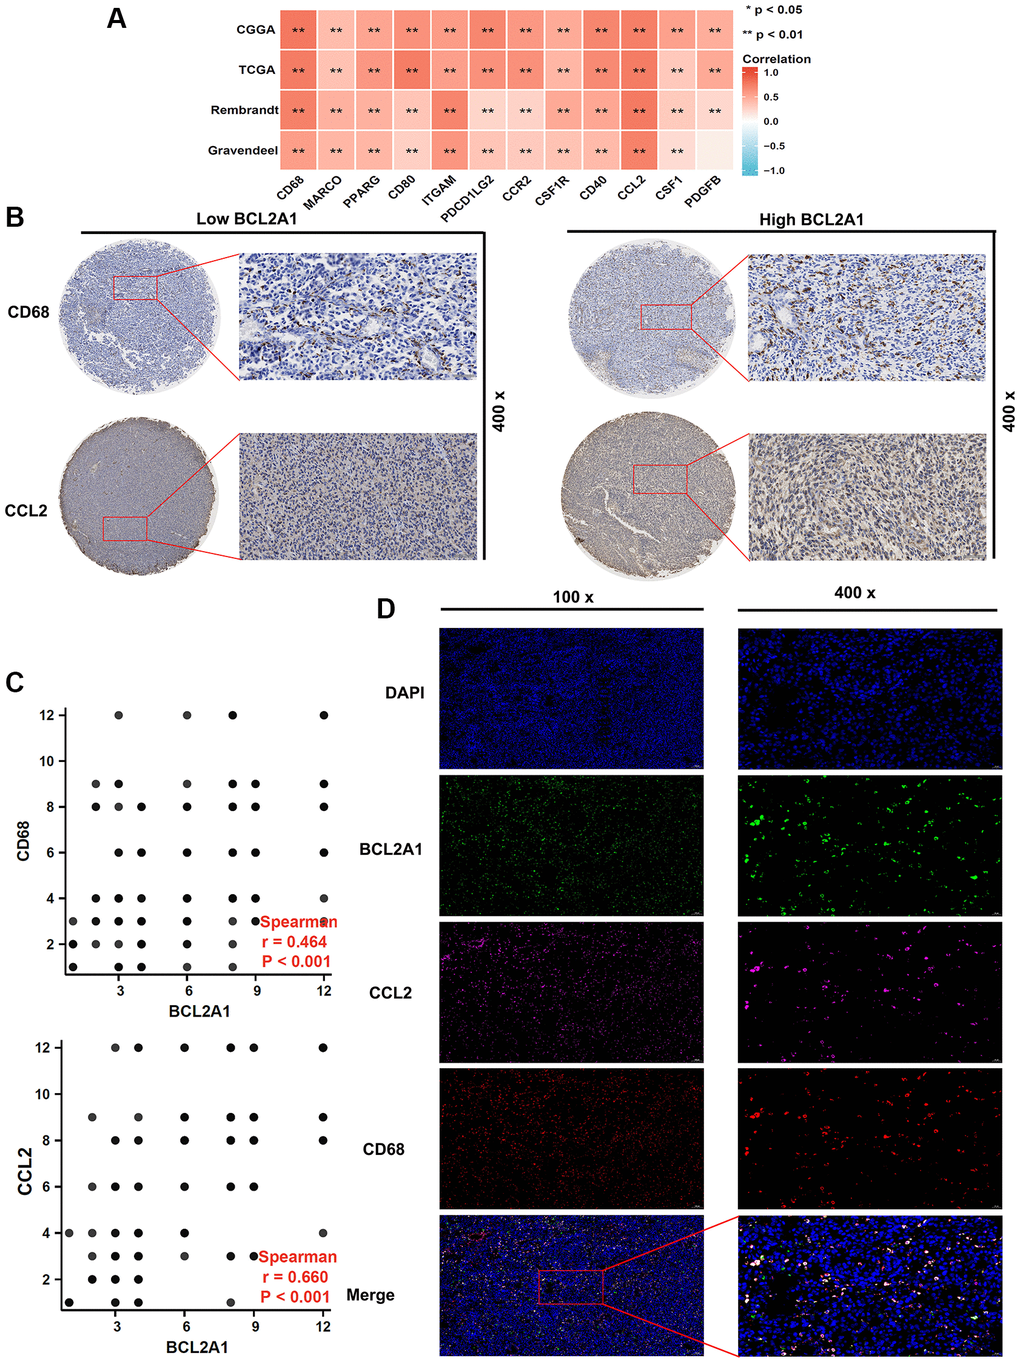 BCL2A1 was associated with tumor-associated macrophage infiltration in gliomas. (A) The correlation between BCL2A1 and tumor-associated macrophage markers in TCGA, CGGA, Rembrandt and Gravendeel datasets. (B) IHC staining analysis of CD68 and CCL2 in glioma tissues. (C) Spearman correlation was used to explore the correlation between TAM infiltration and BCL2A1 expression. (D) The relationship between BCL2A1, CD68 and CCL2 was analyzed by multiple immunofluorescences. Abbreviation: TAMs: tumor-associated macrophages.